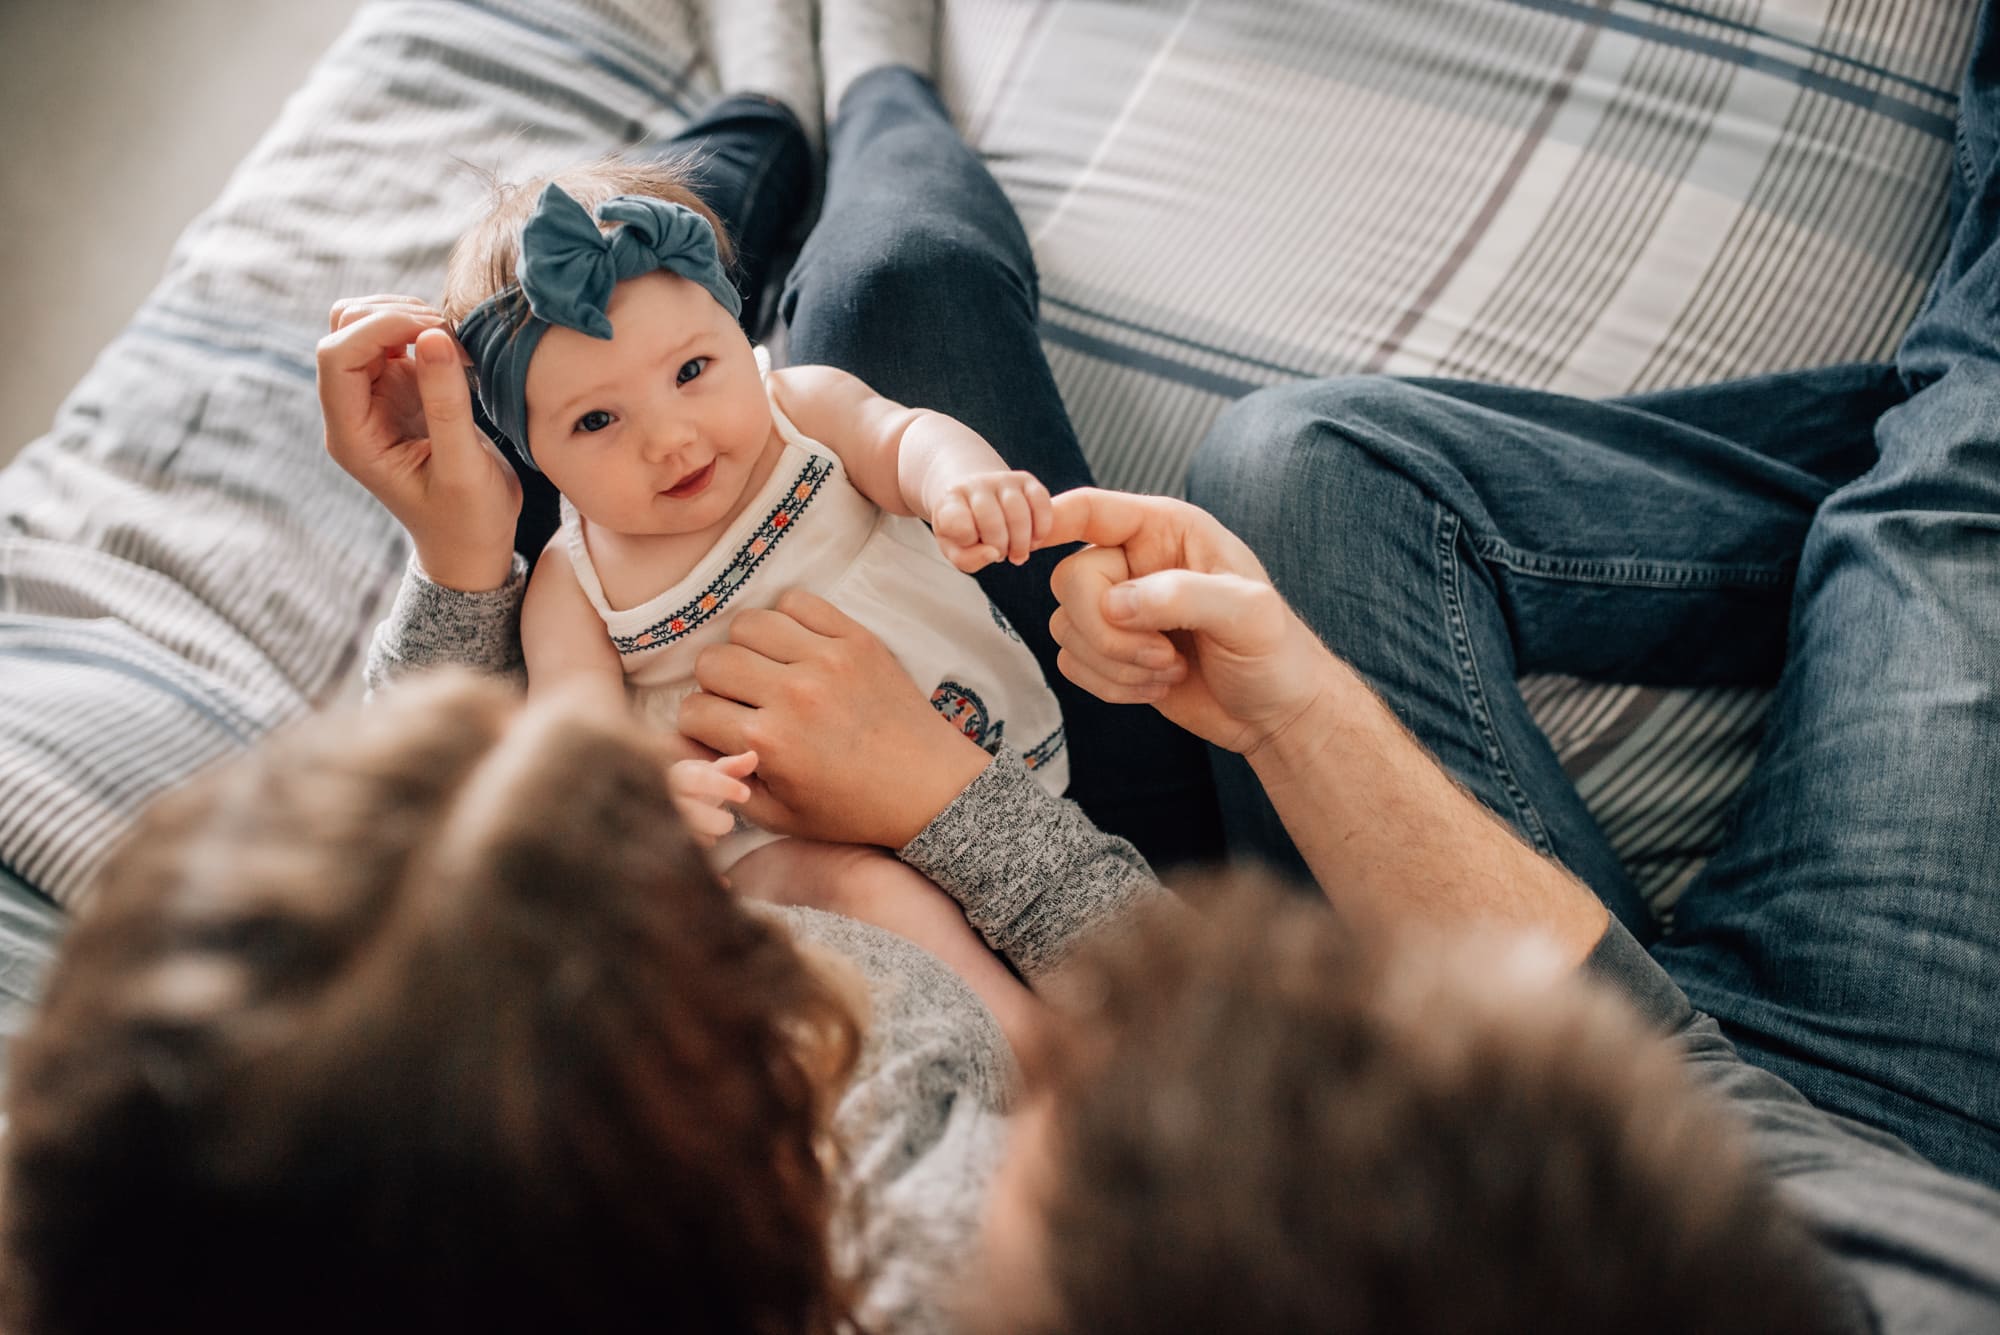 Couple look down at their baby girl with her hand curled around dad's finger in tender Vancouver family photo session inside their home.